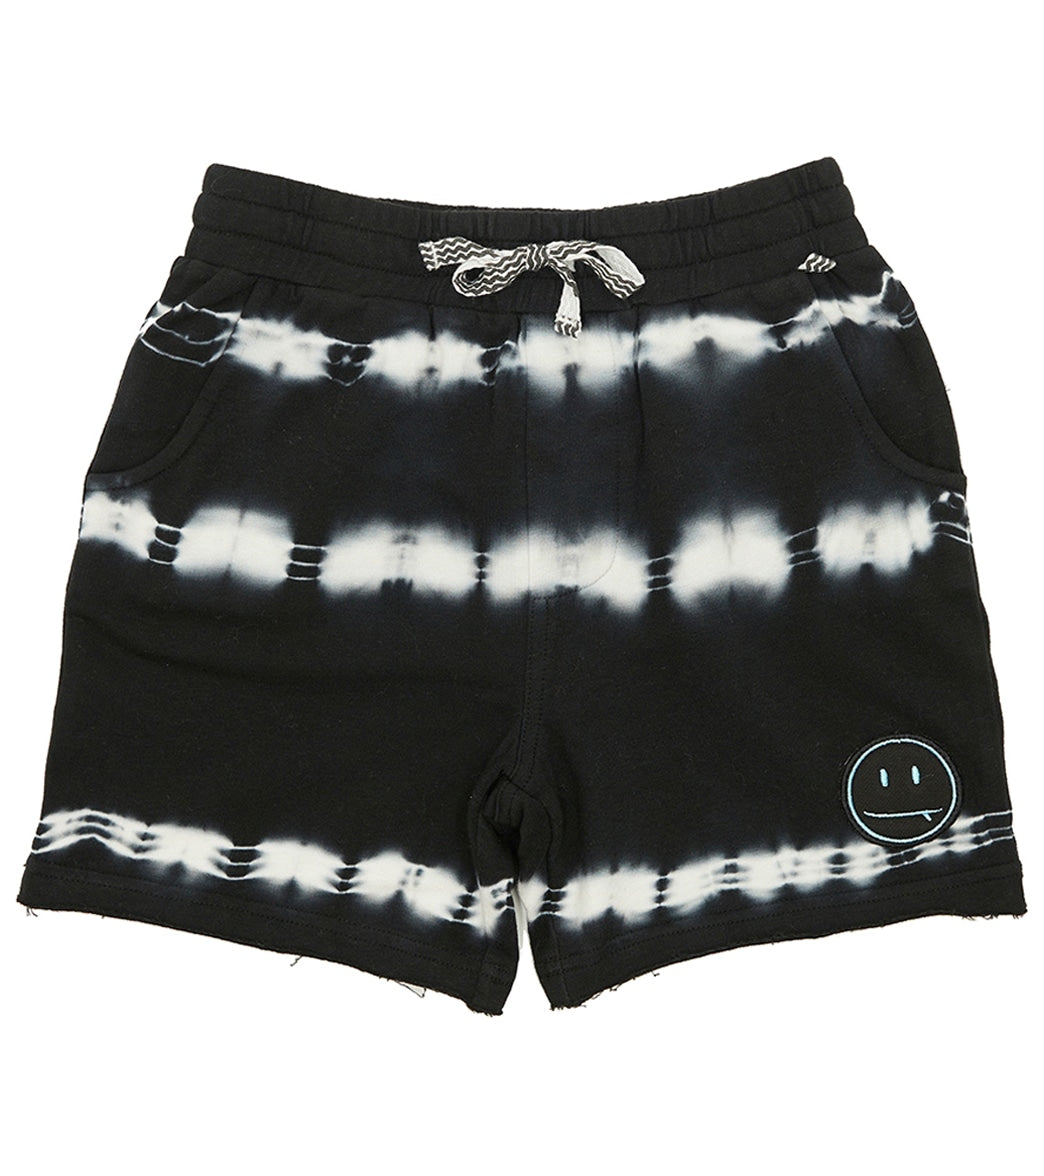 Feather 4 Arrow Boys Low Tide Shorts (Baby, Toddler, Little Kid, Big Kid)